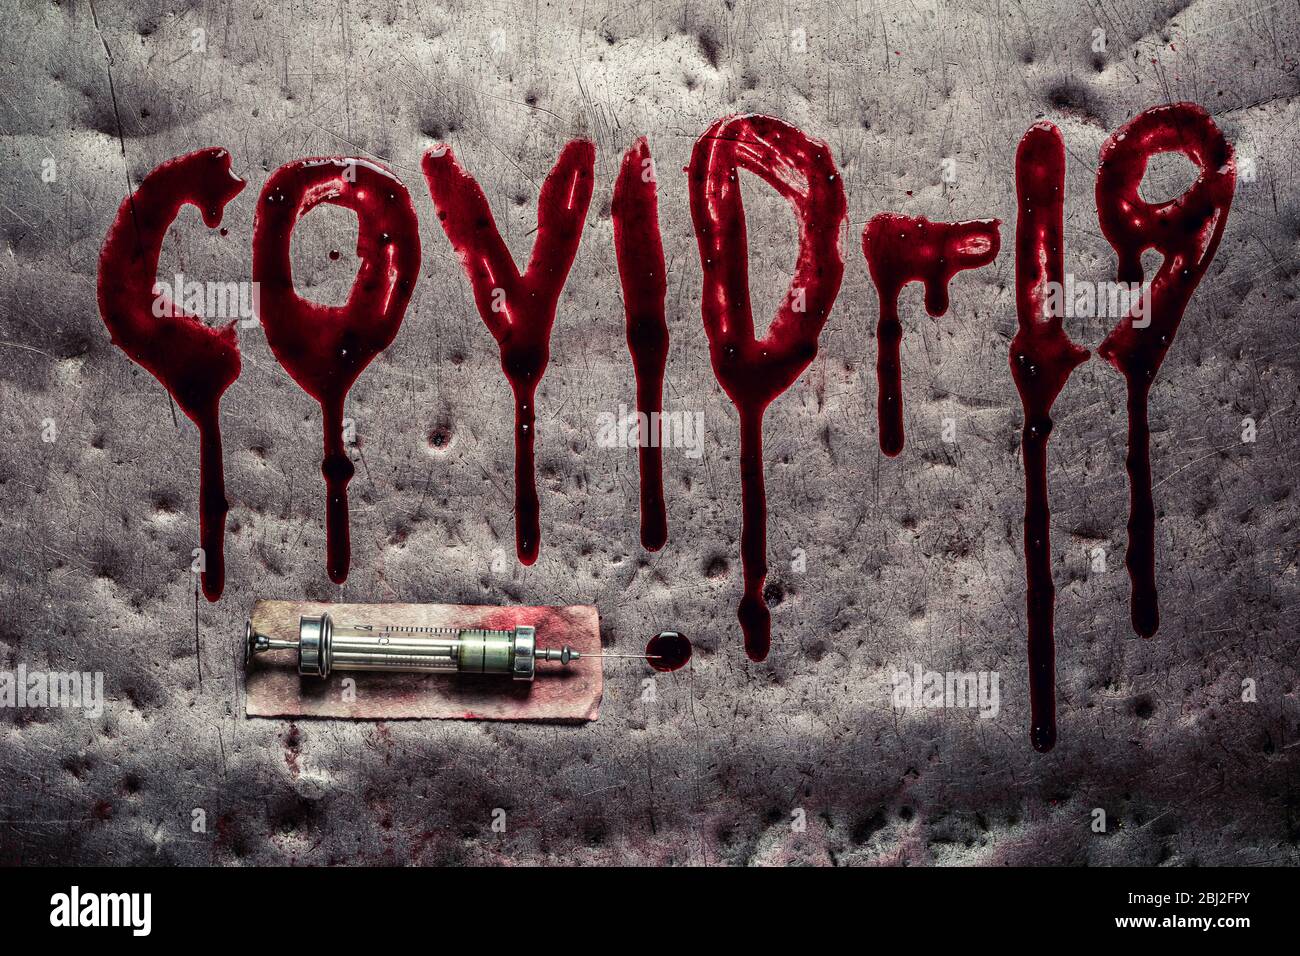 Bloody and dripping word Covid19 and old syringe and needle Stock Photo